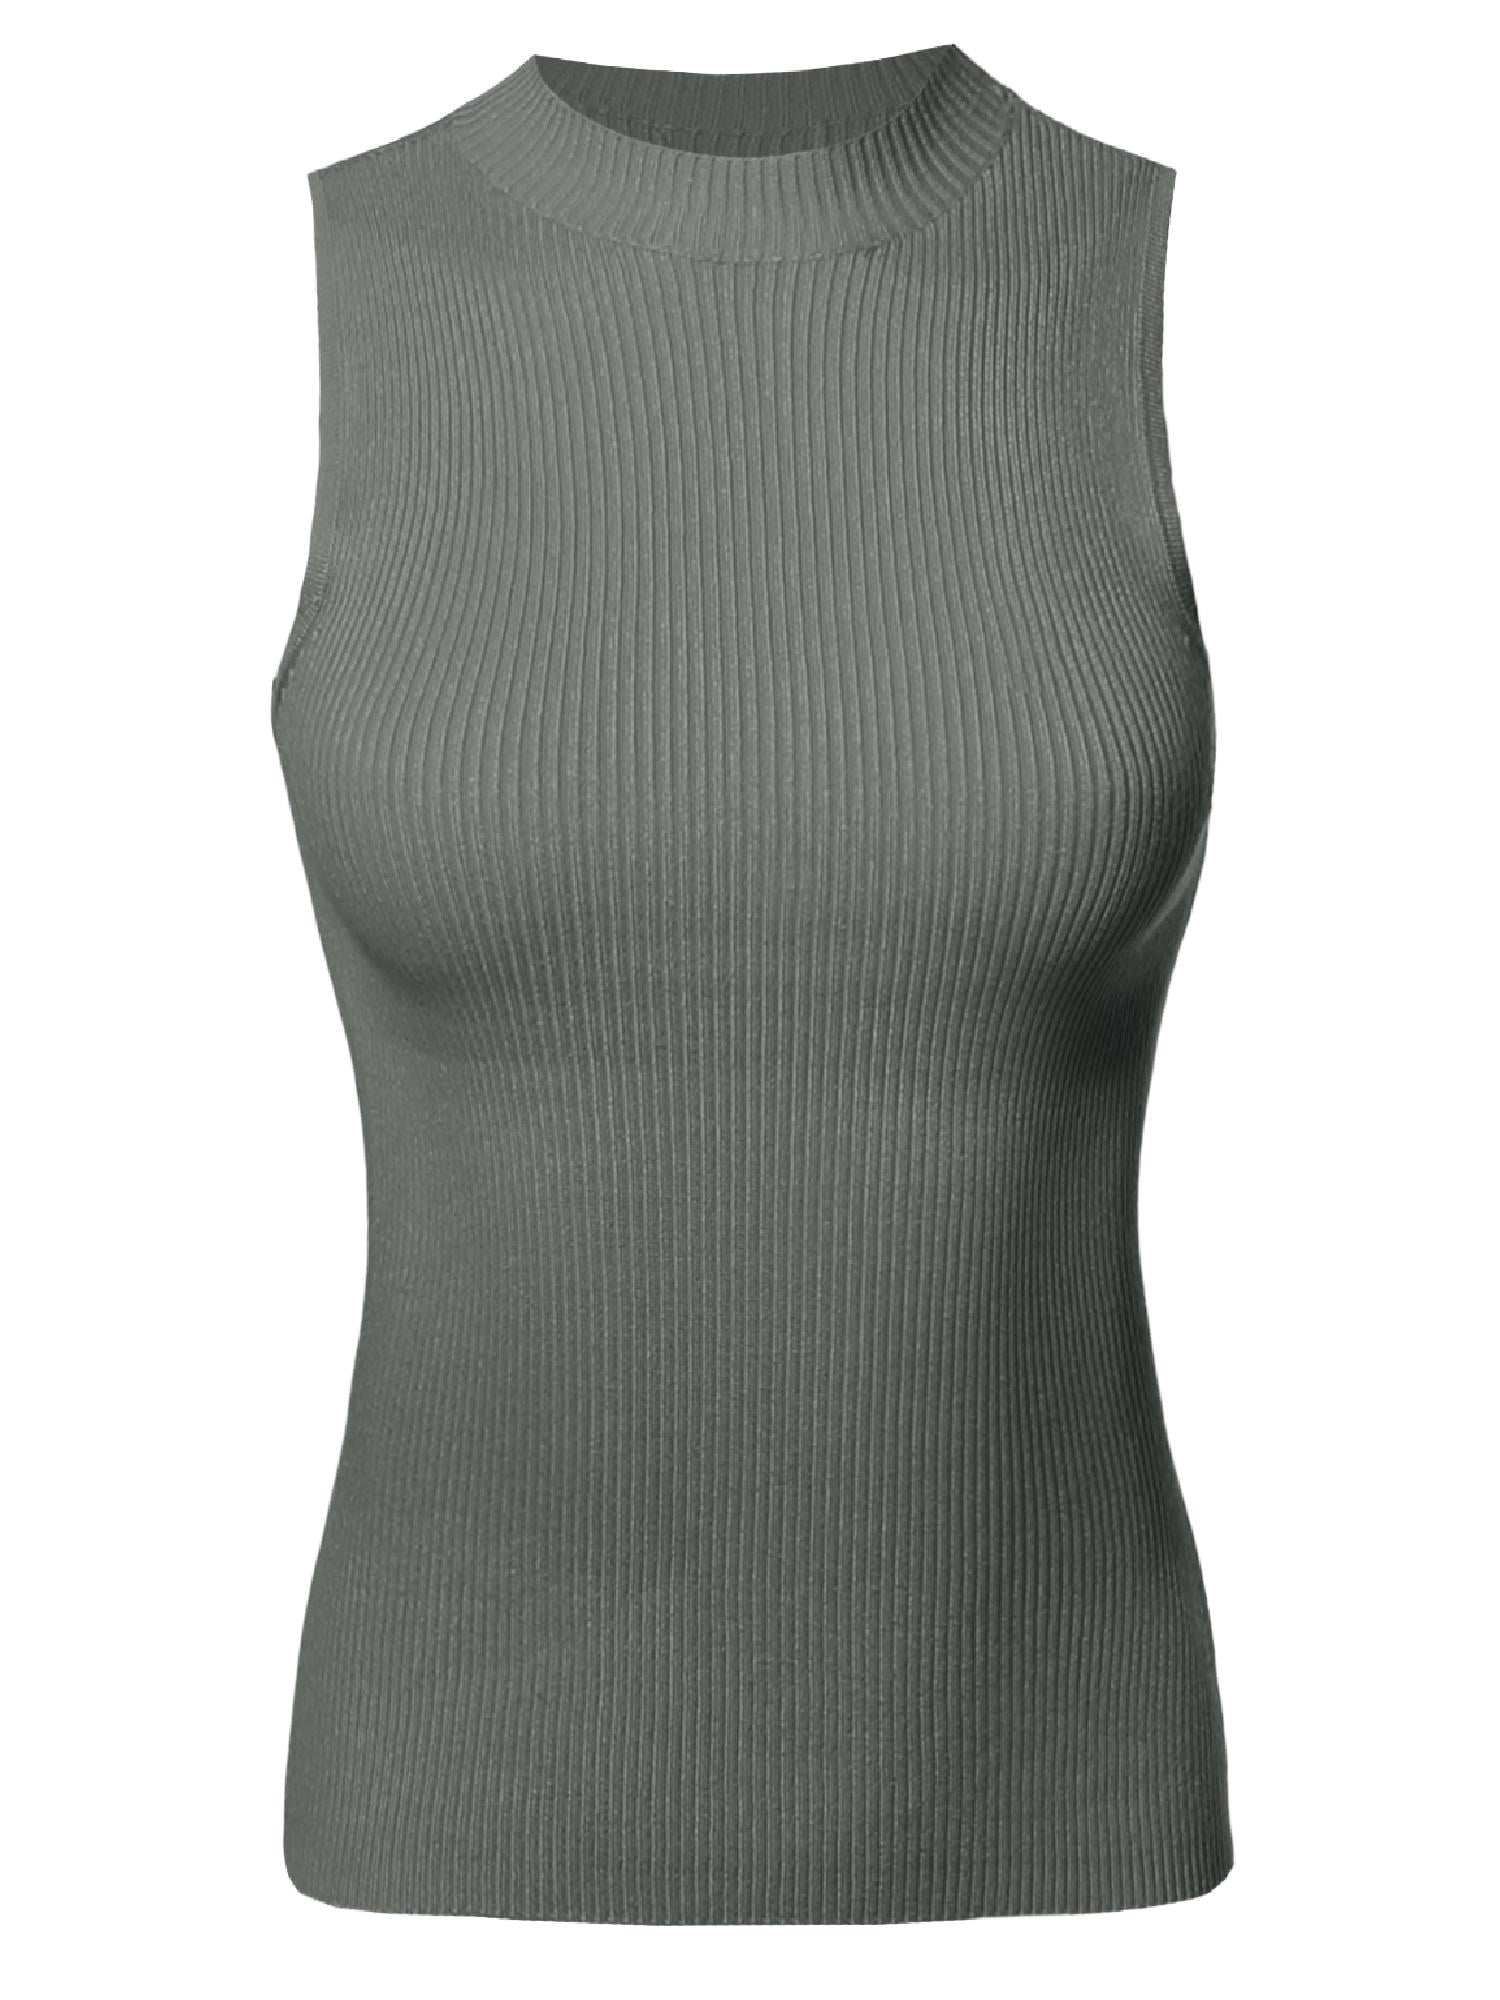 FashionOutfit - FashionOutfit Women's Solid Stretch Ribbed Sleeveless ...